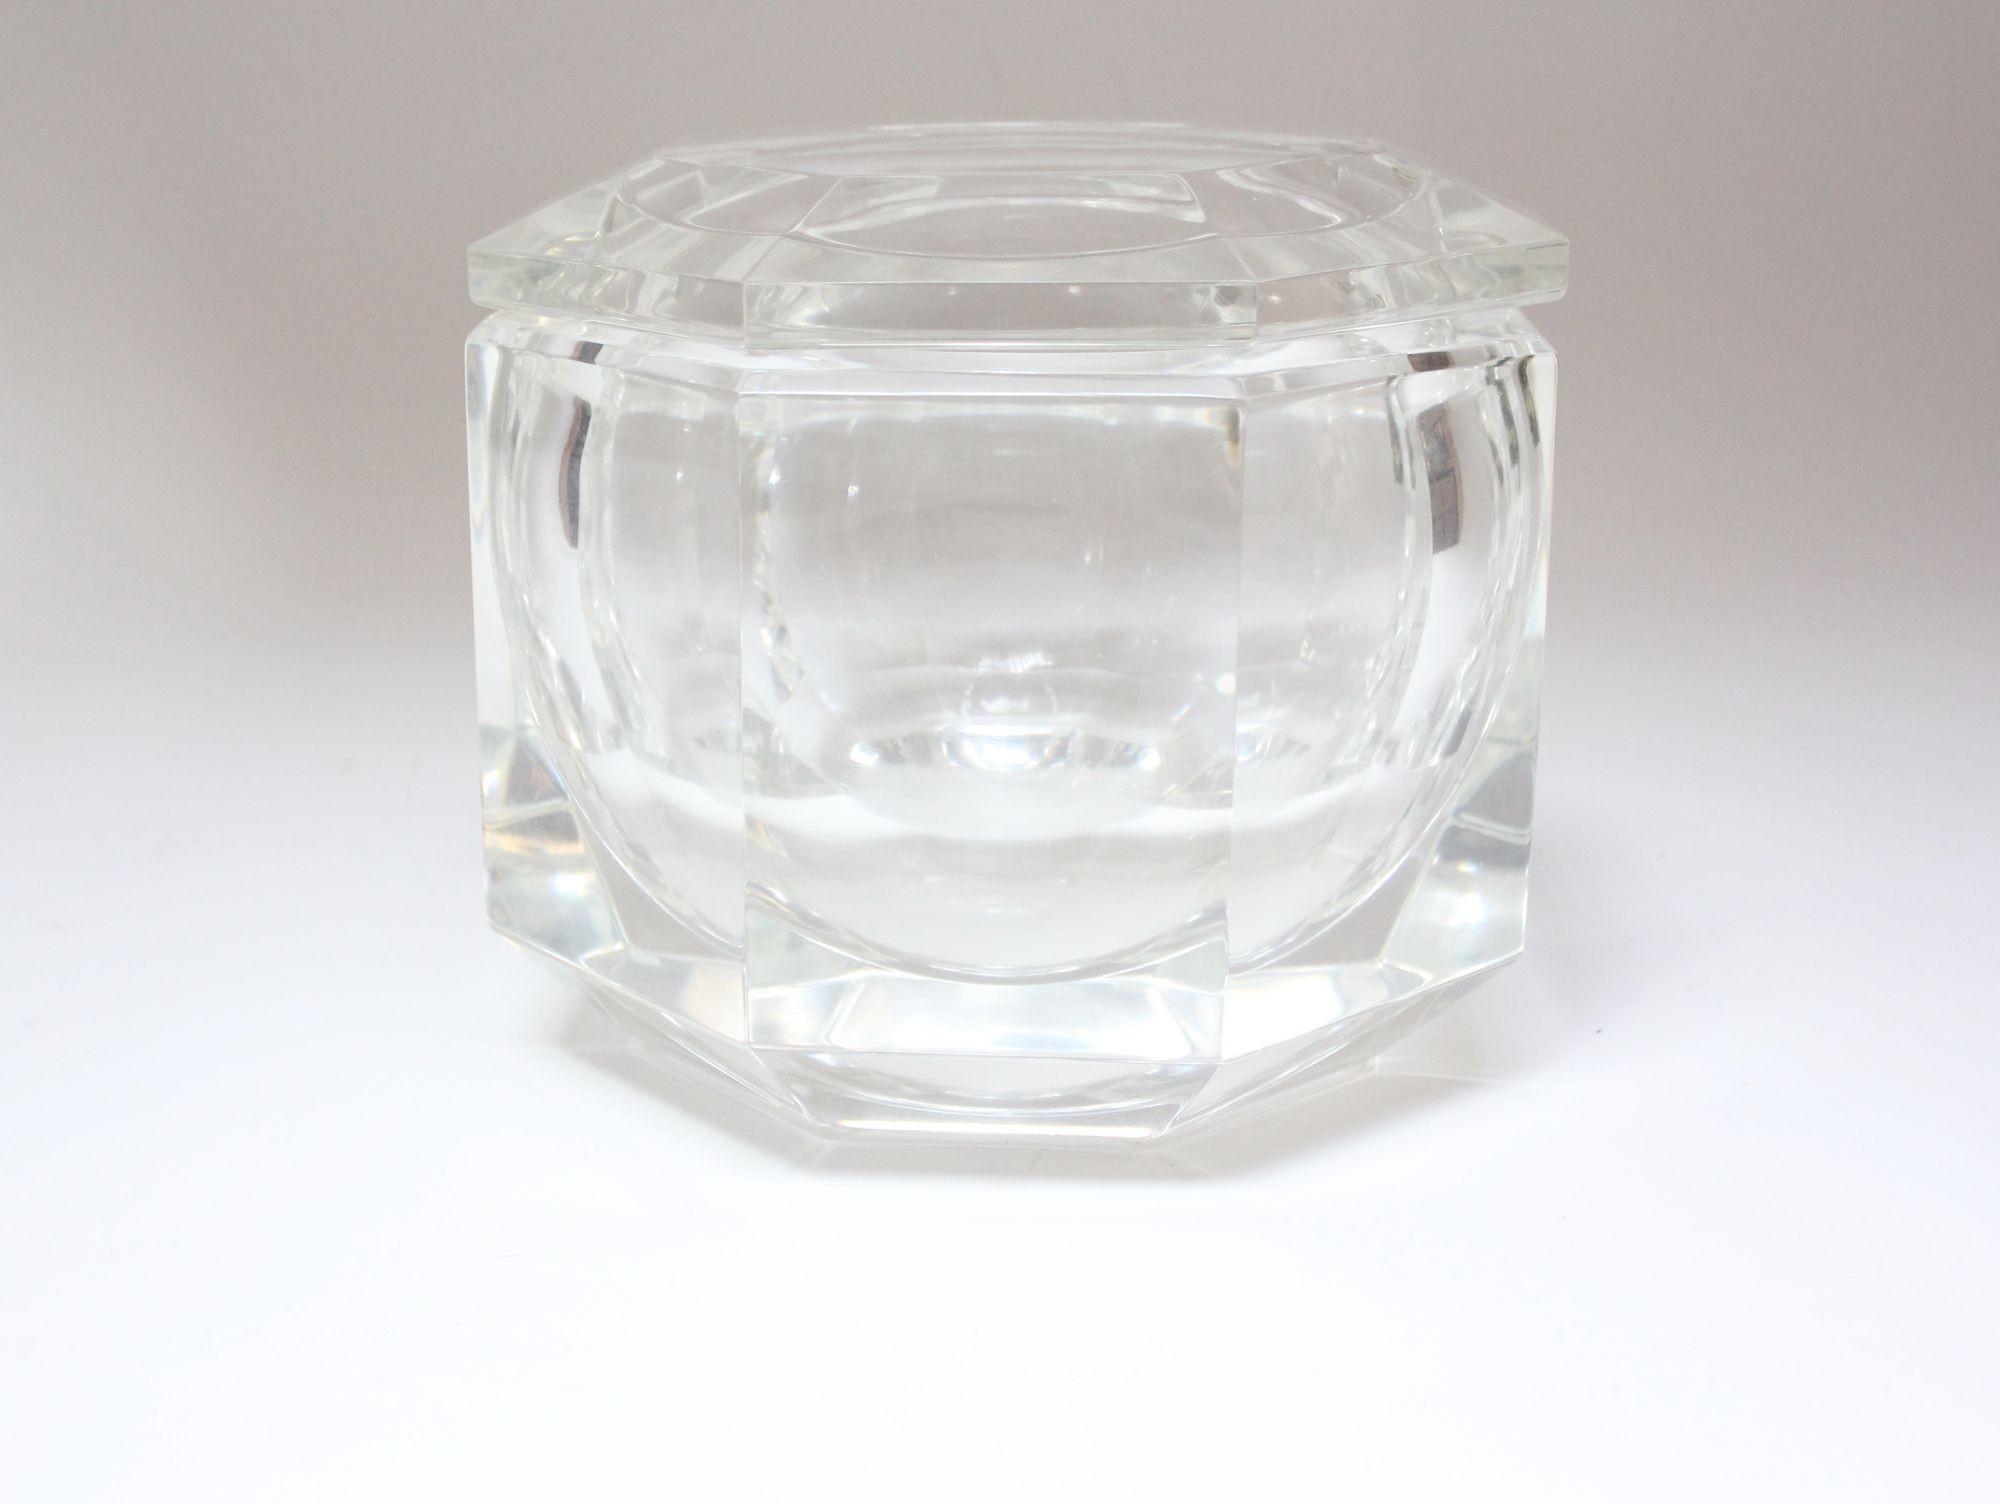 Luxurious lucite ice bucket by Alessandro Albrizzi having an octagonal form (ca. 1970s, Italy).
Top swivels open via an inset brass mechanism.
Excellent, vintage condition with only light wear consistent with age (namely, patina/tarnish to the